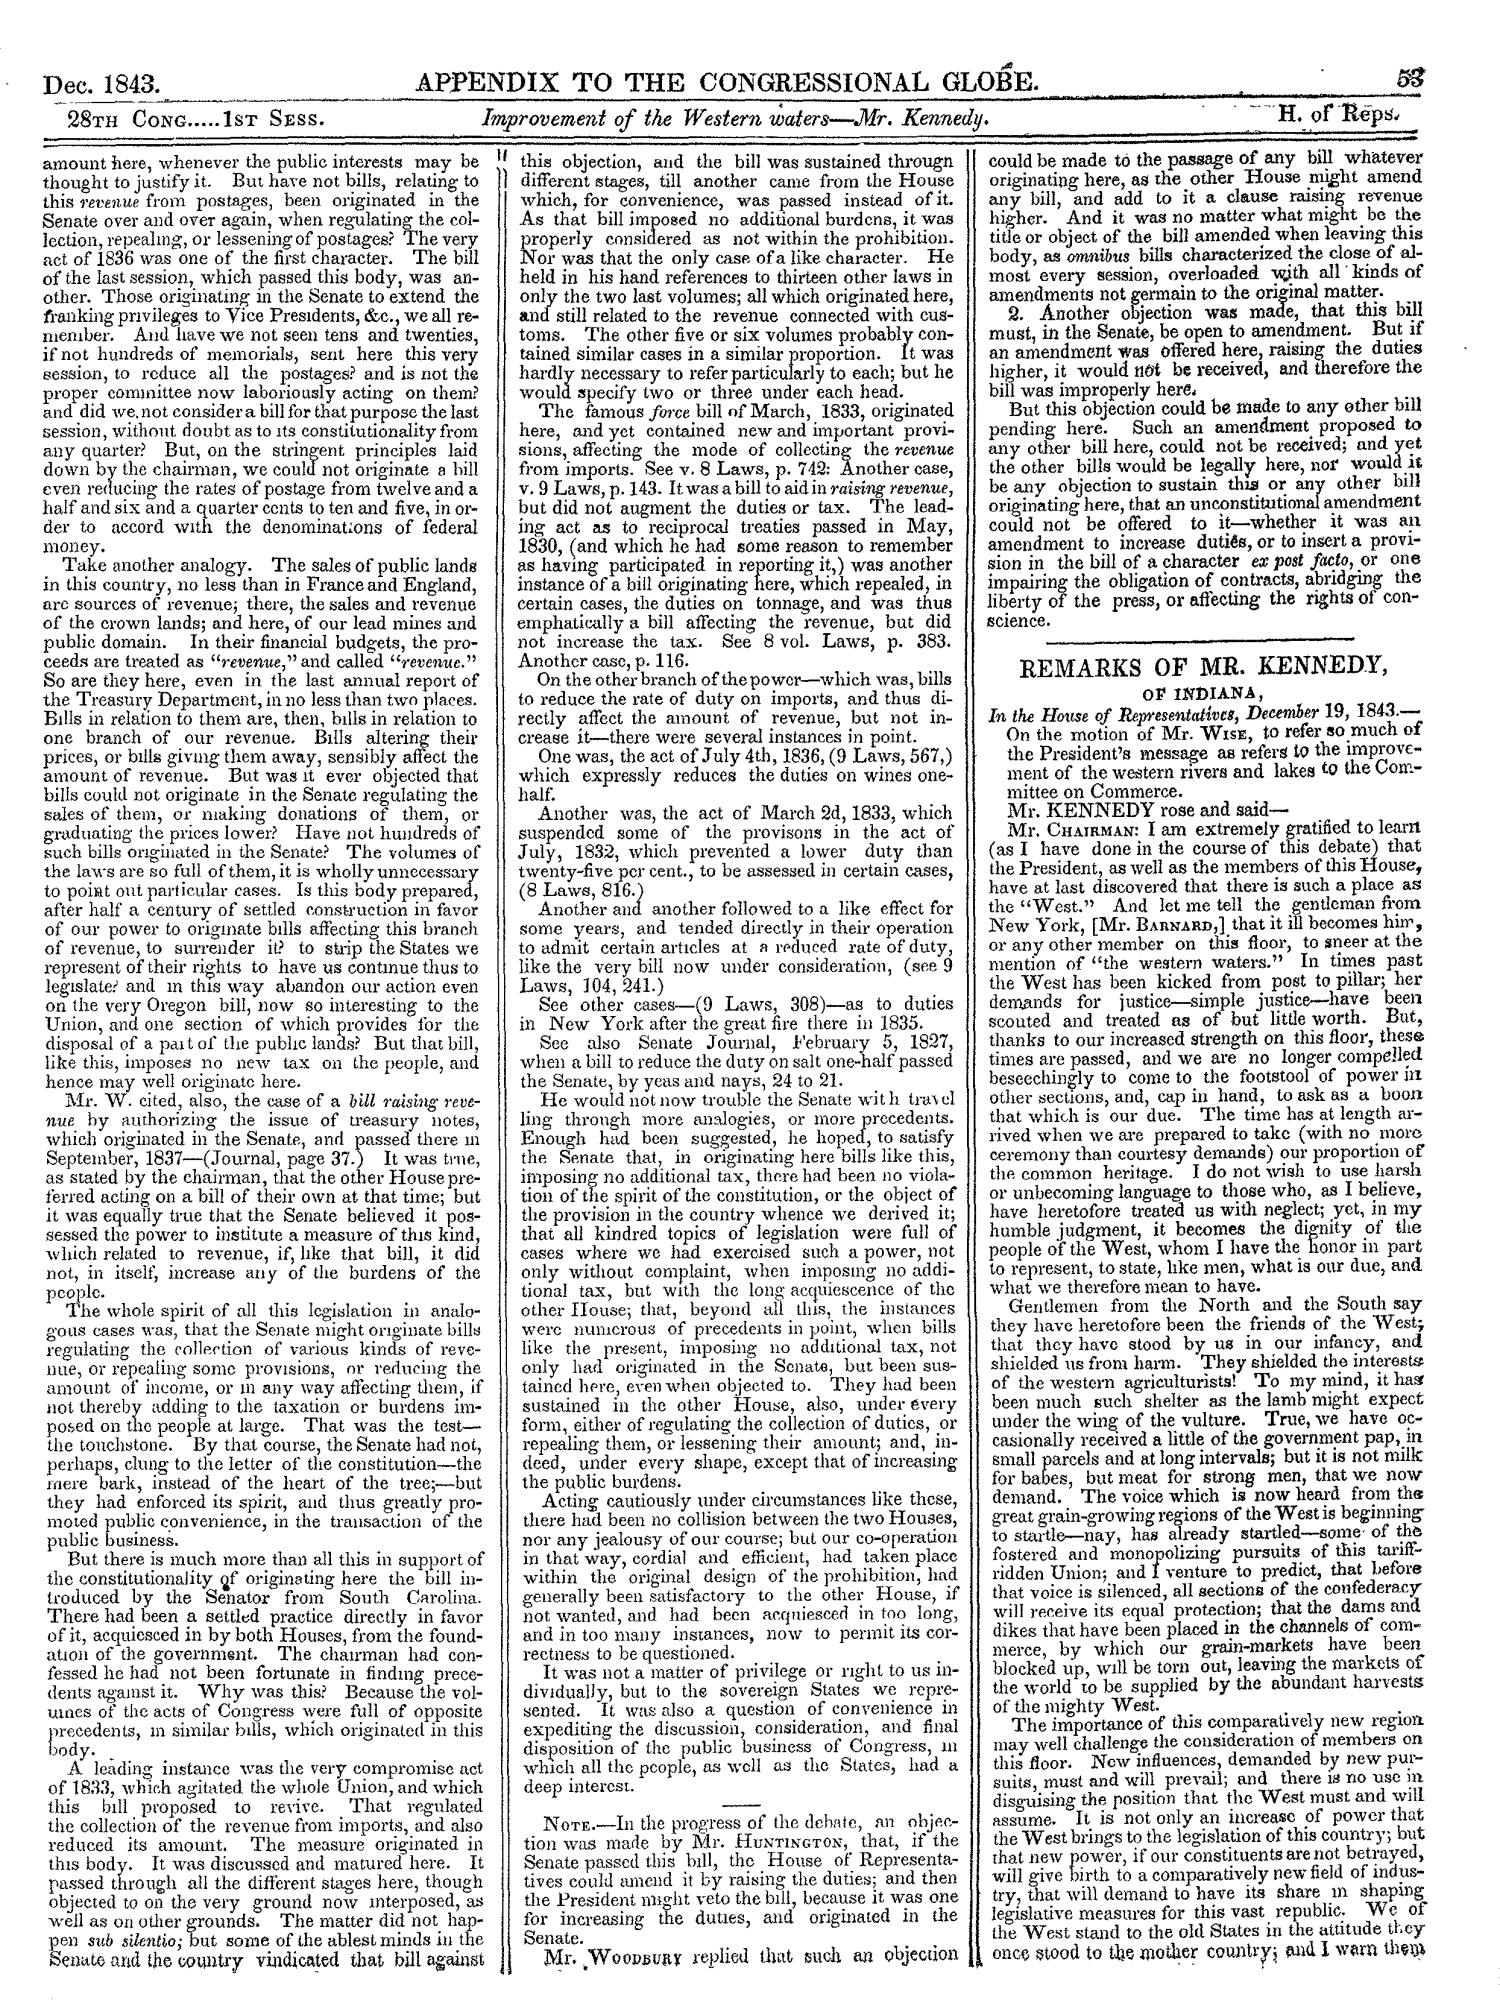 The Congressional Globe, Volume 13, Part 2: Twenty-Eighth Congress, First Session
                                                
                                                    53
                                                